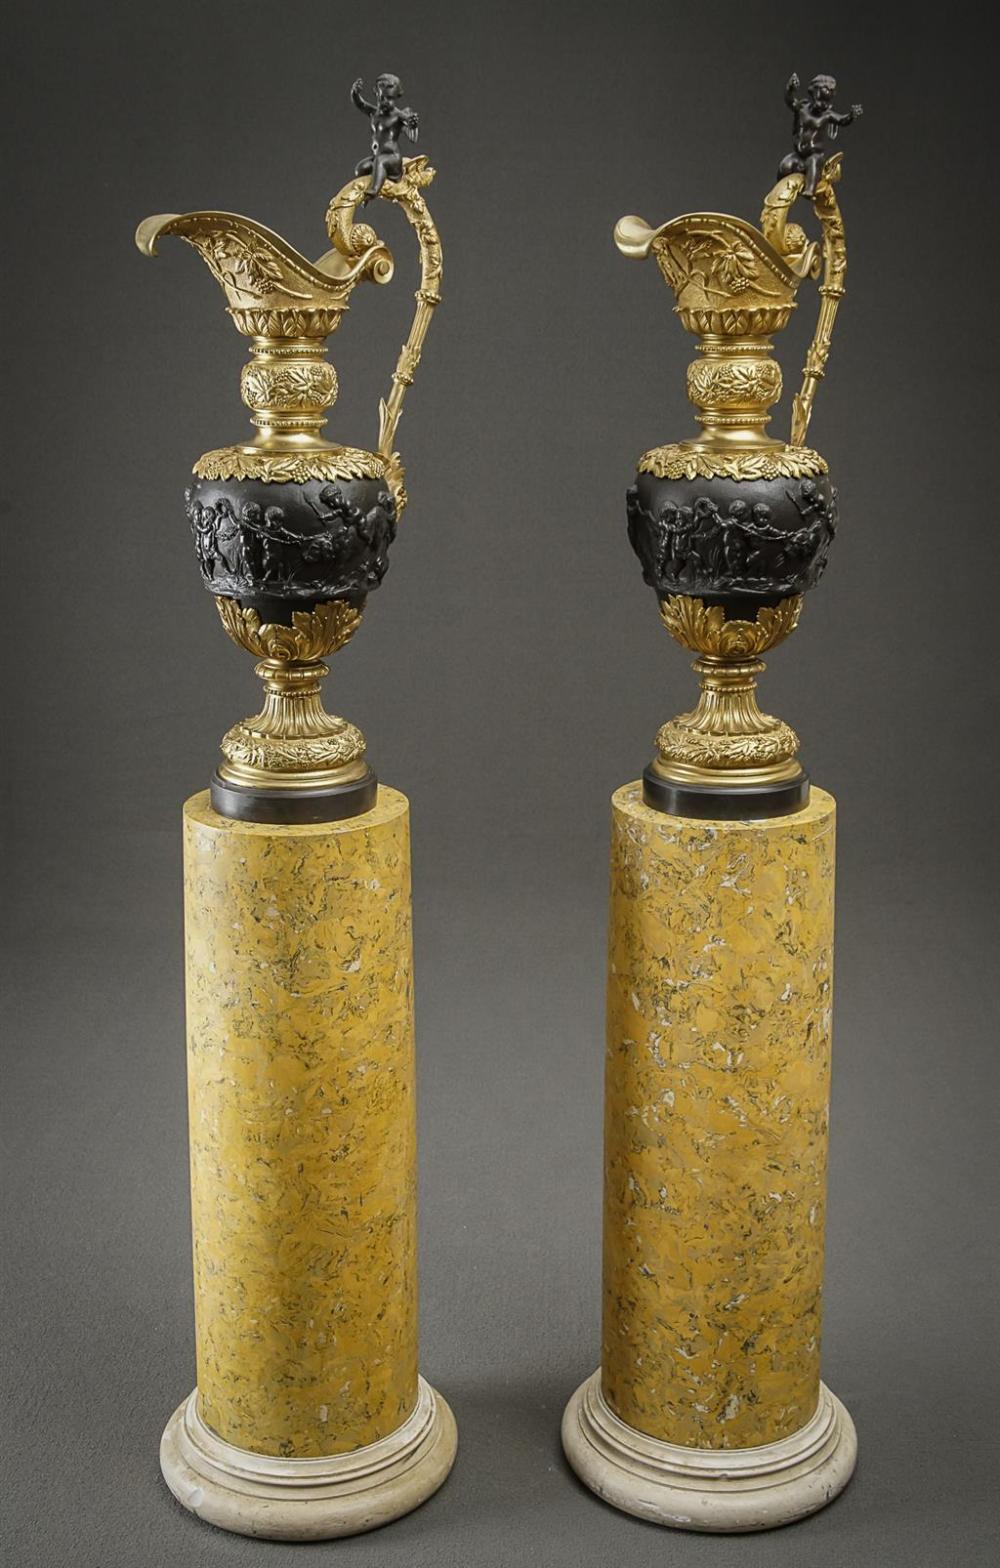 PAIR OF NEOCLASSICAL STYLE GILT 32a50d